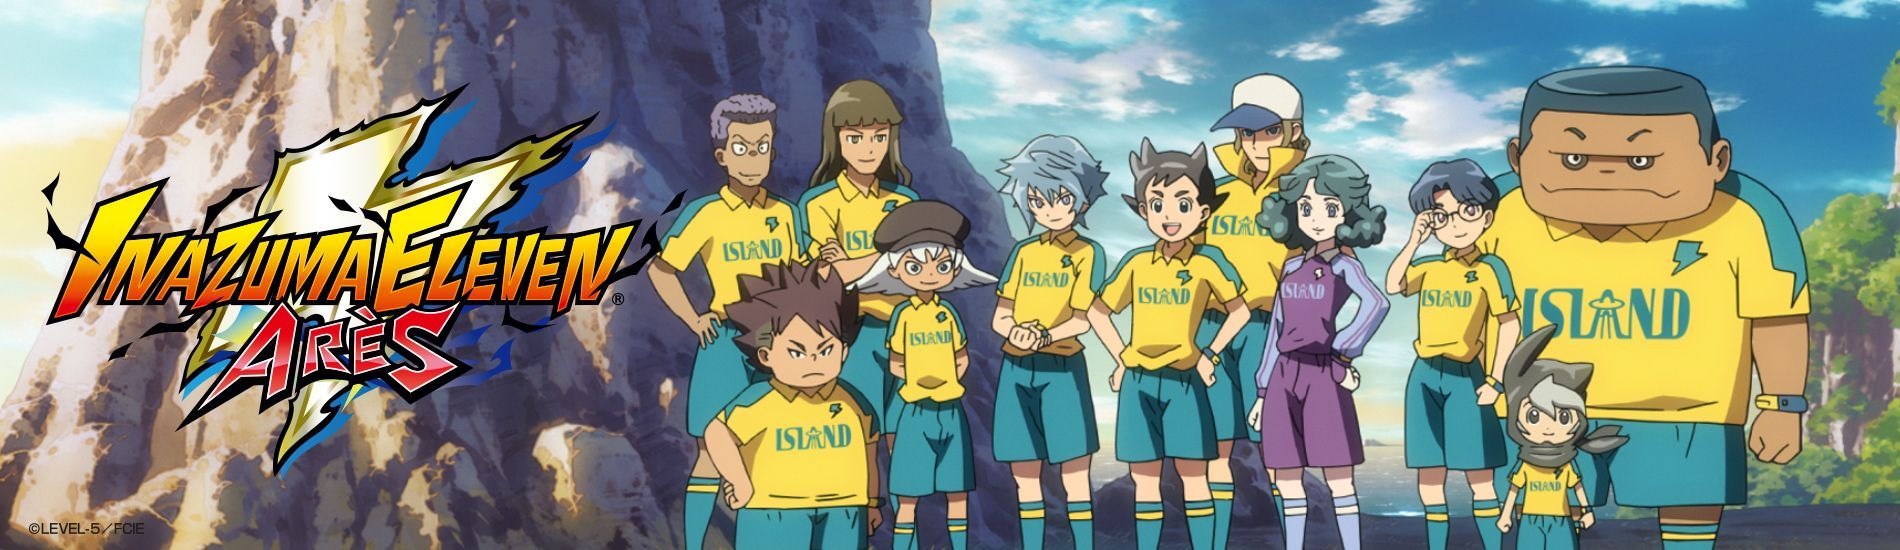 Inazuma Eleven Ares en streaming sur Gulli Replay